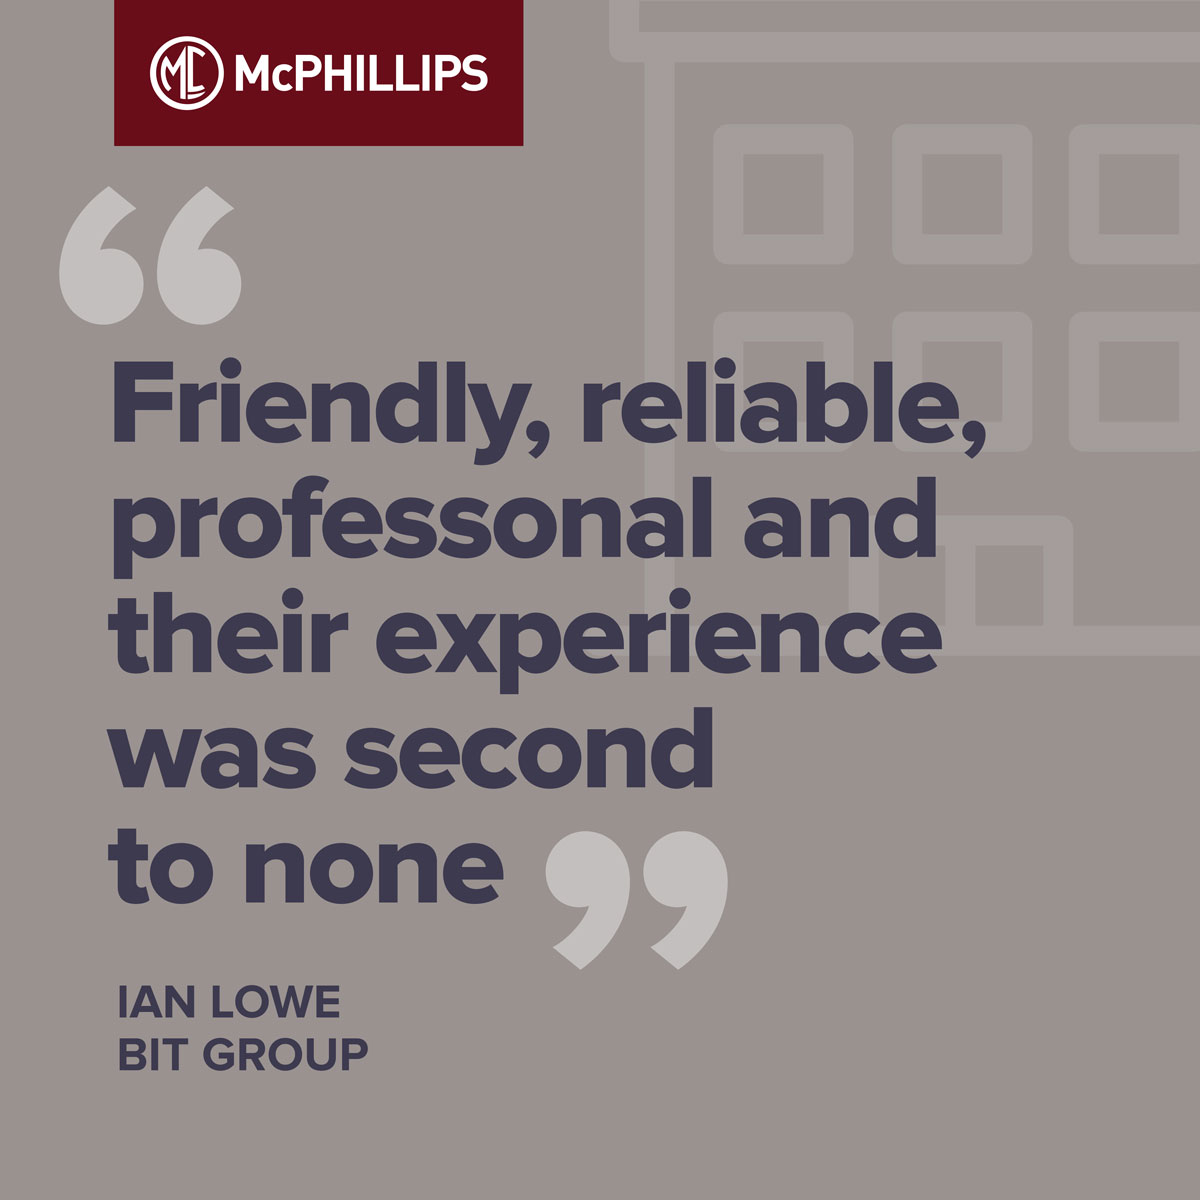 We work hard to deliver solutions to the highest standards, striving to be the best and delighting our clients.

See how our values translate into satisfied customers at mcphillips.co.uk/testimonials/

#Teamwork #HighStandards #HighPerformance #CustomerSatisfaction